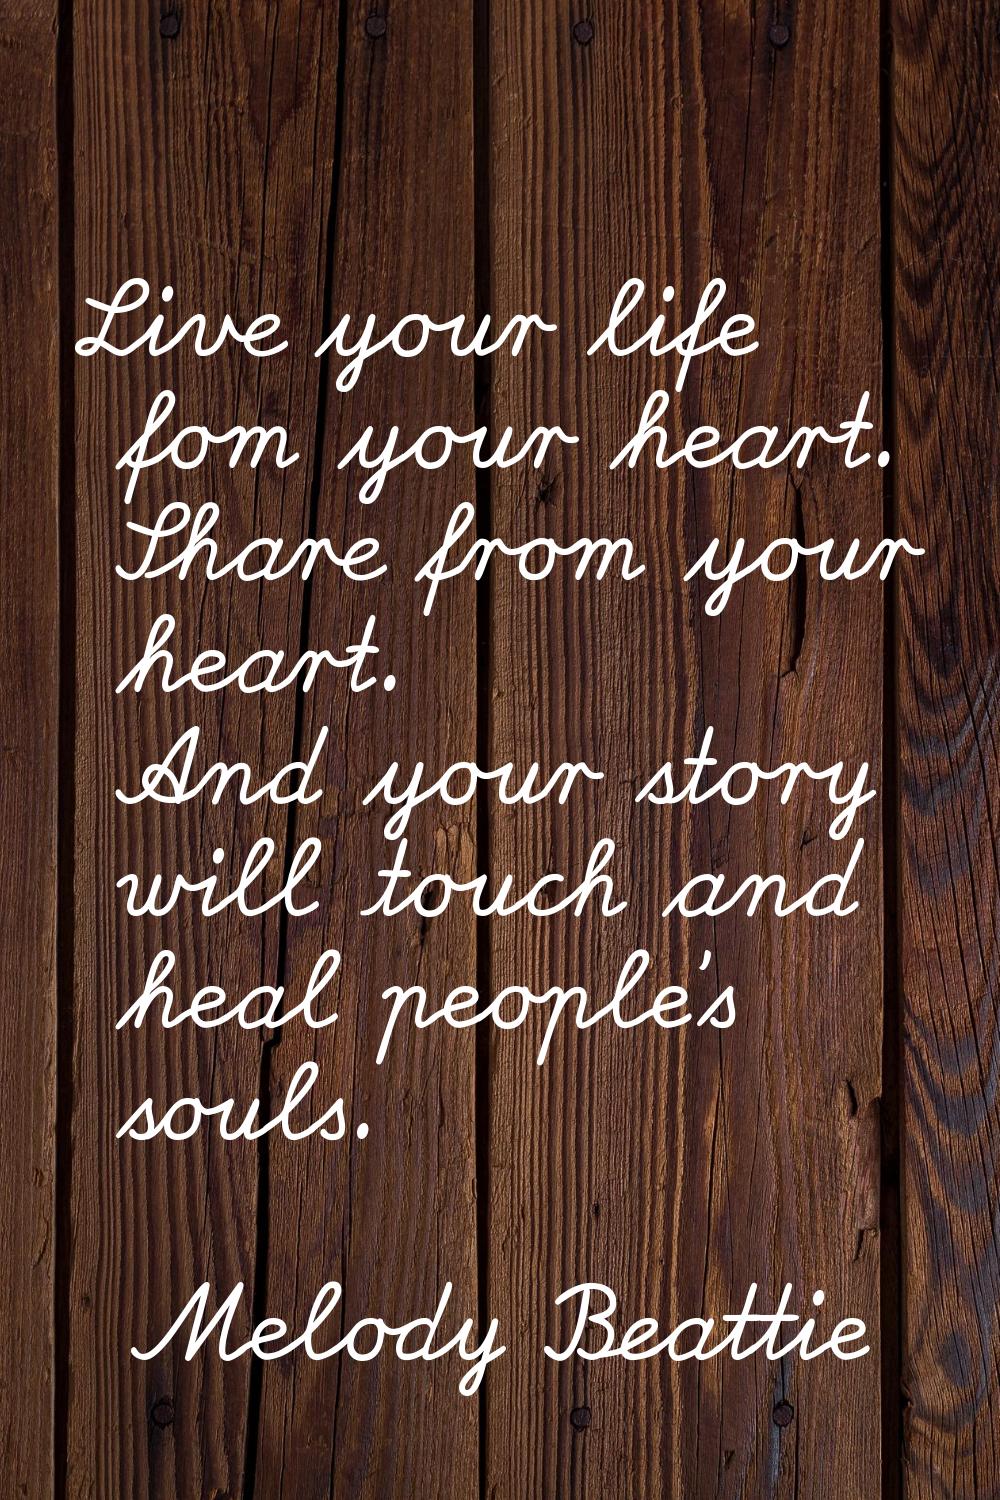 Live your life fom your heart. Share from your heart. And your story will touch and heal people's s